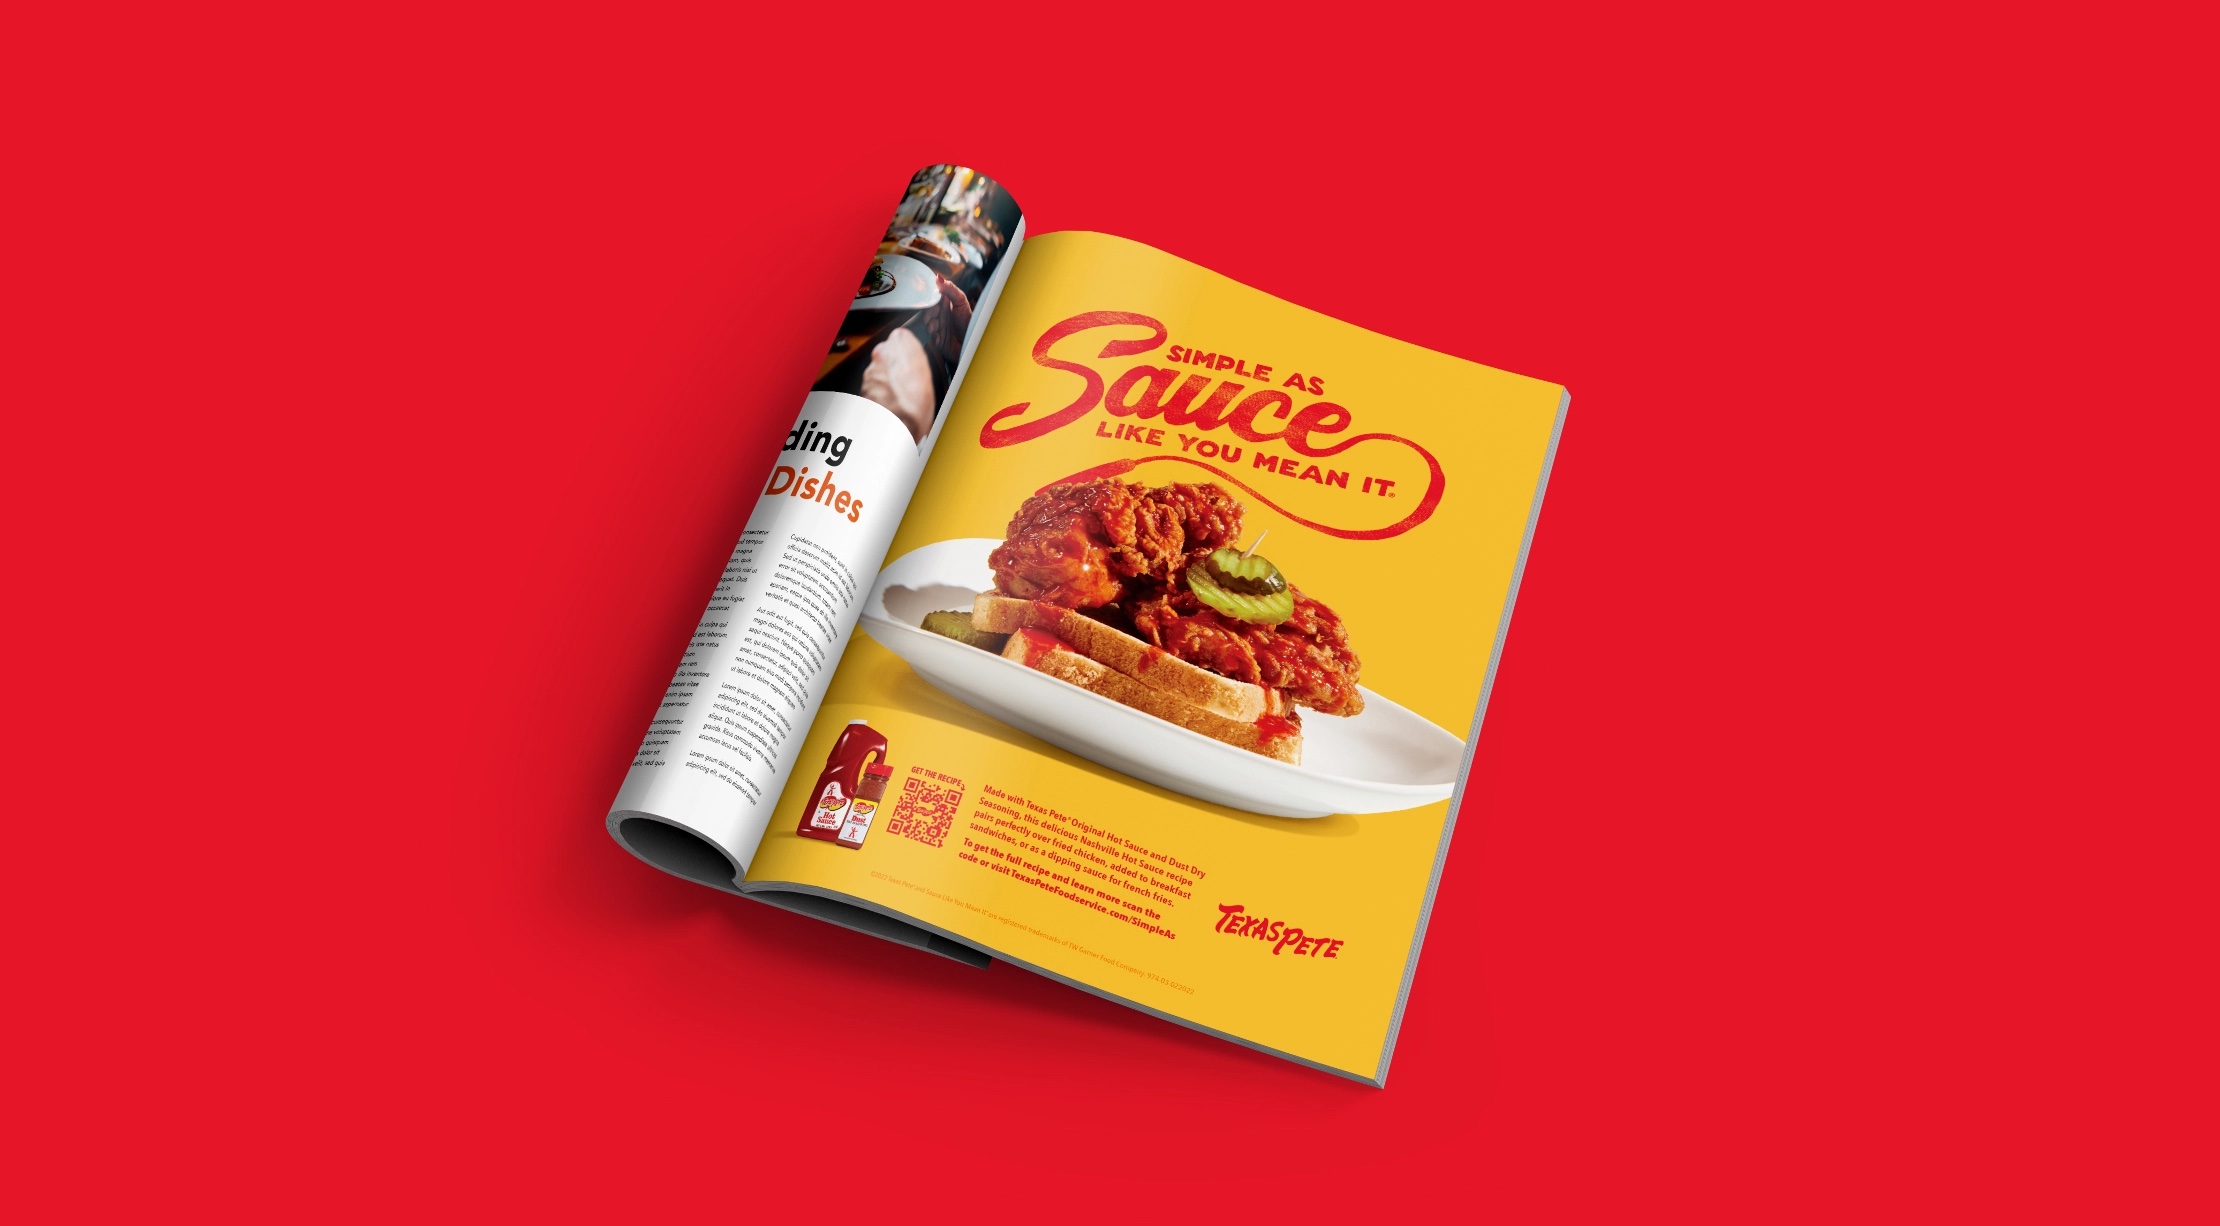 Texas Pete sauce like you mean it foodservice print ad campaign